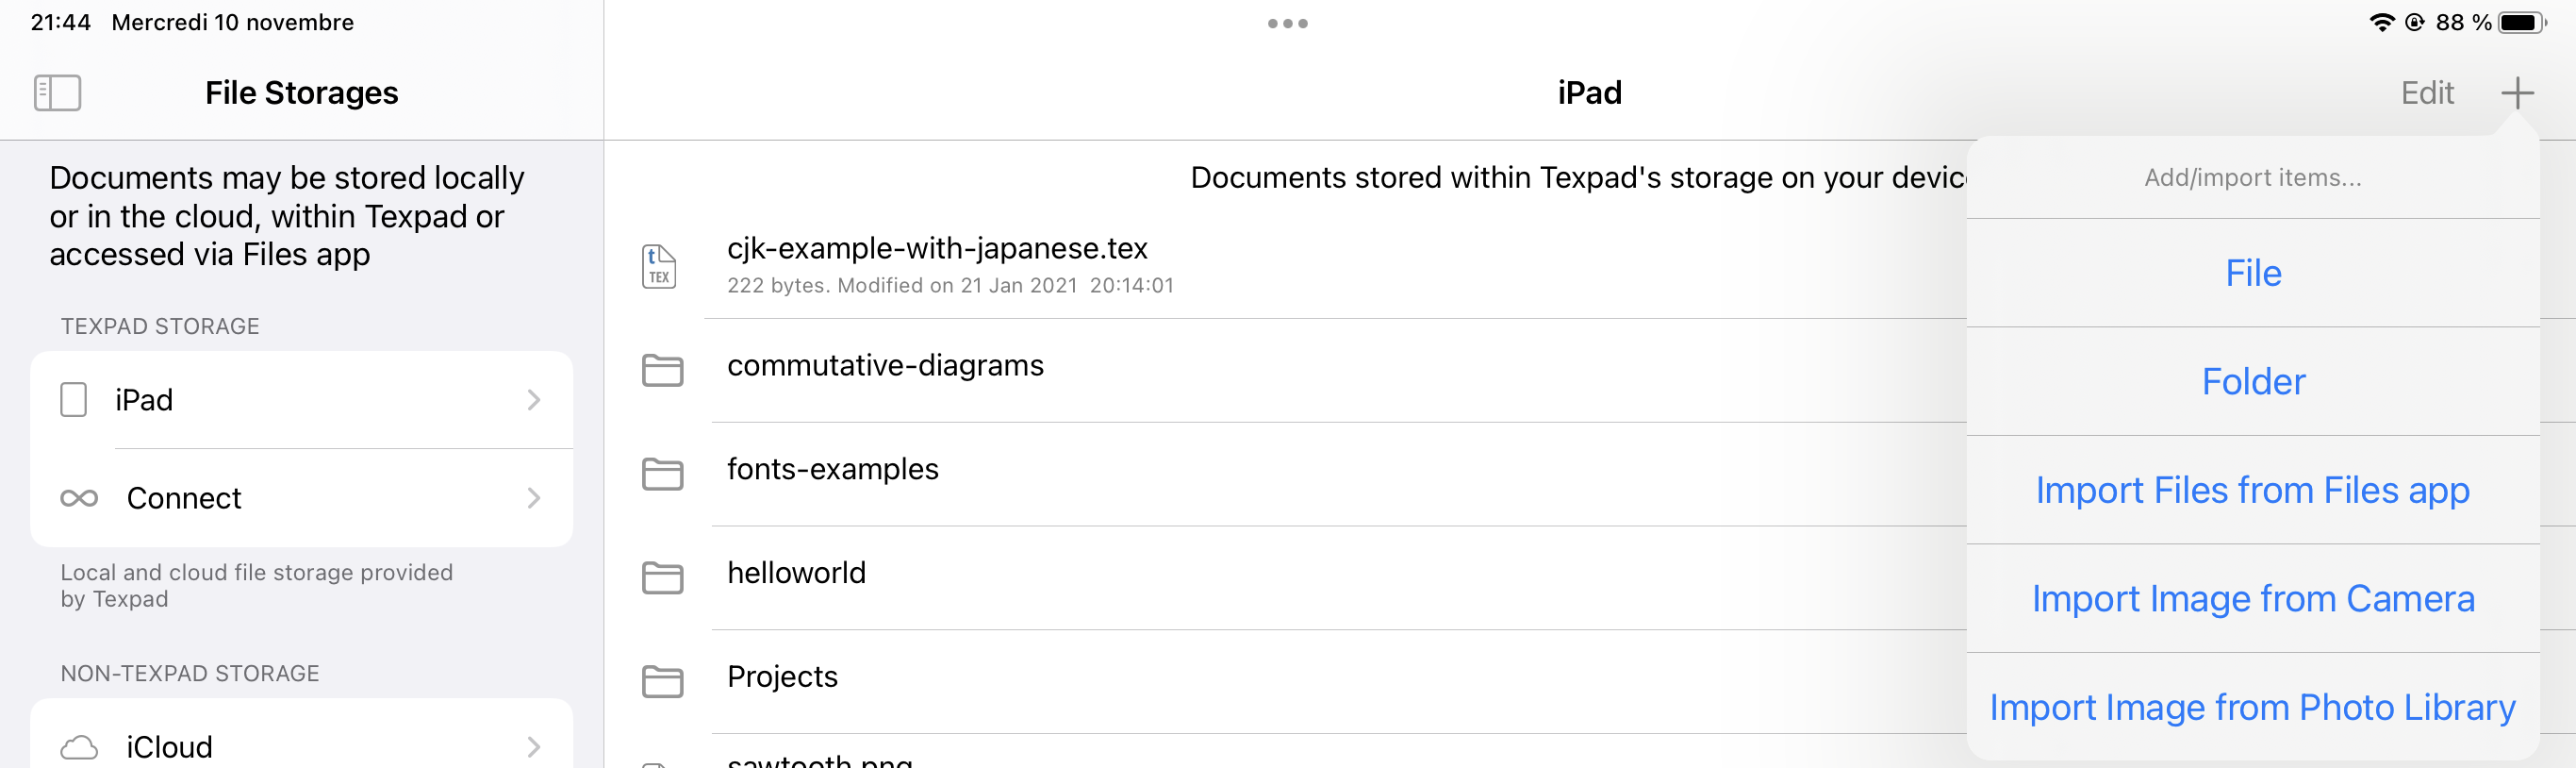 docs/apps/typesetting/examples/creating-images/folder-view-add-menu_ios_ipad.png